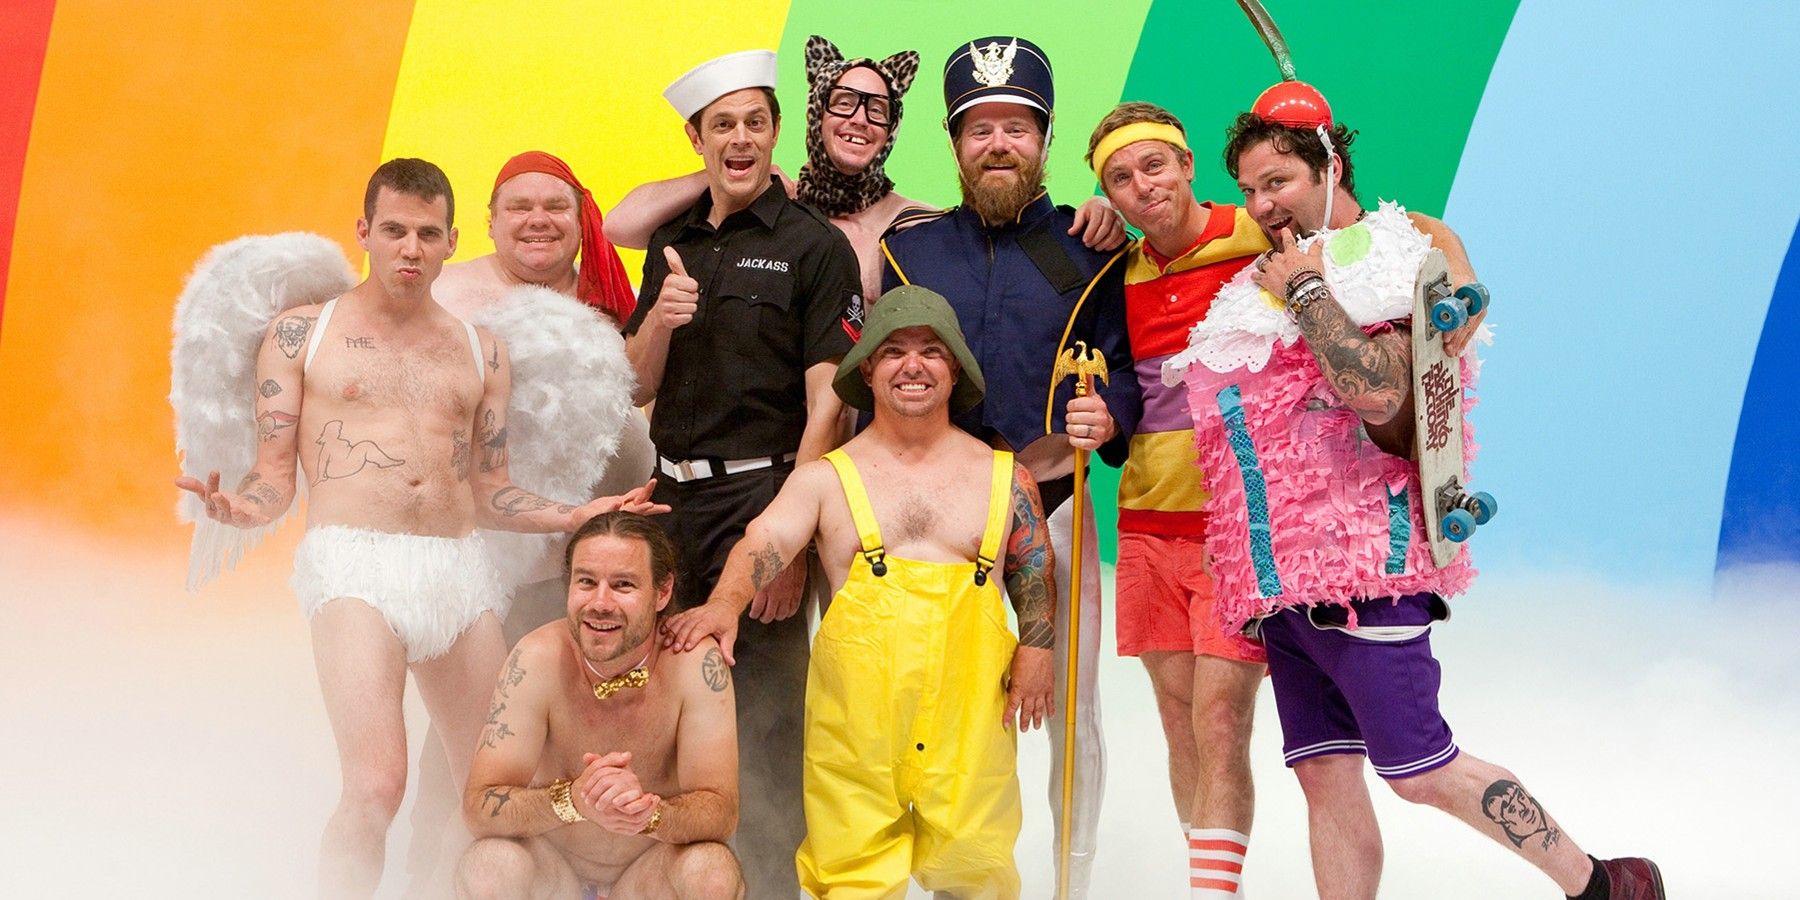 The cast of Jackass 3 with Bam Margera